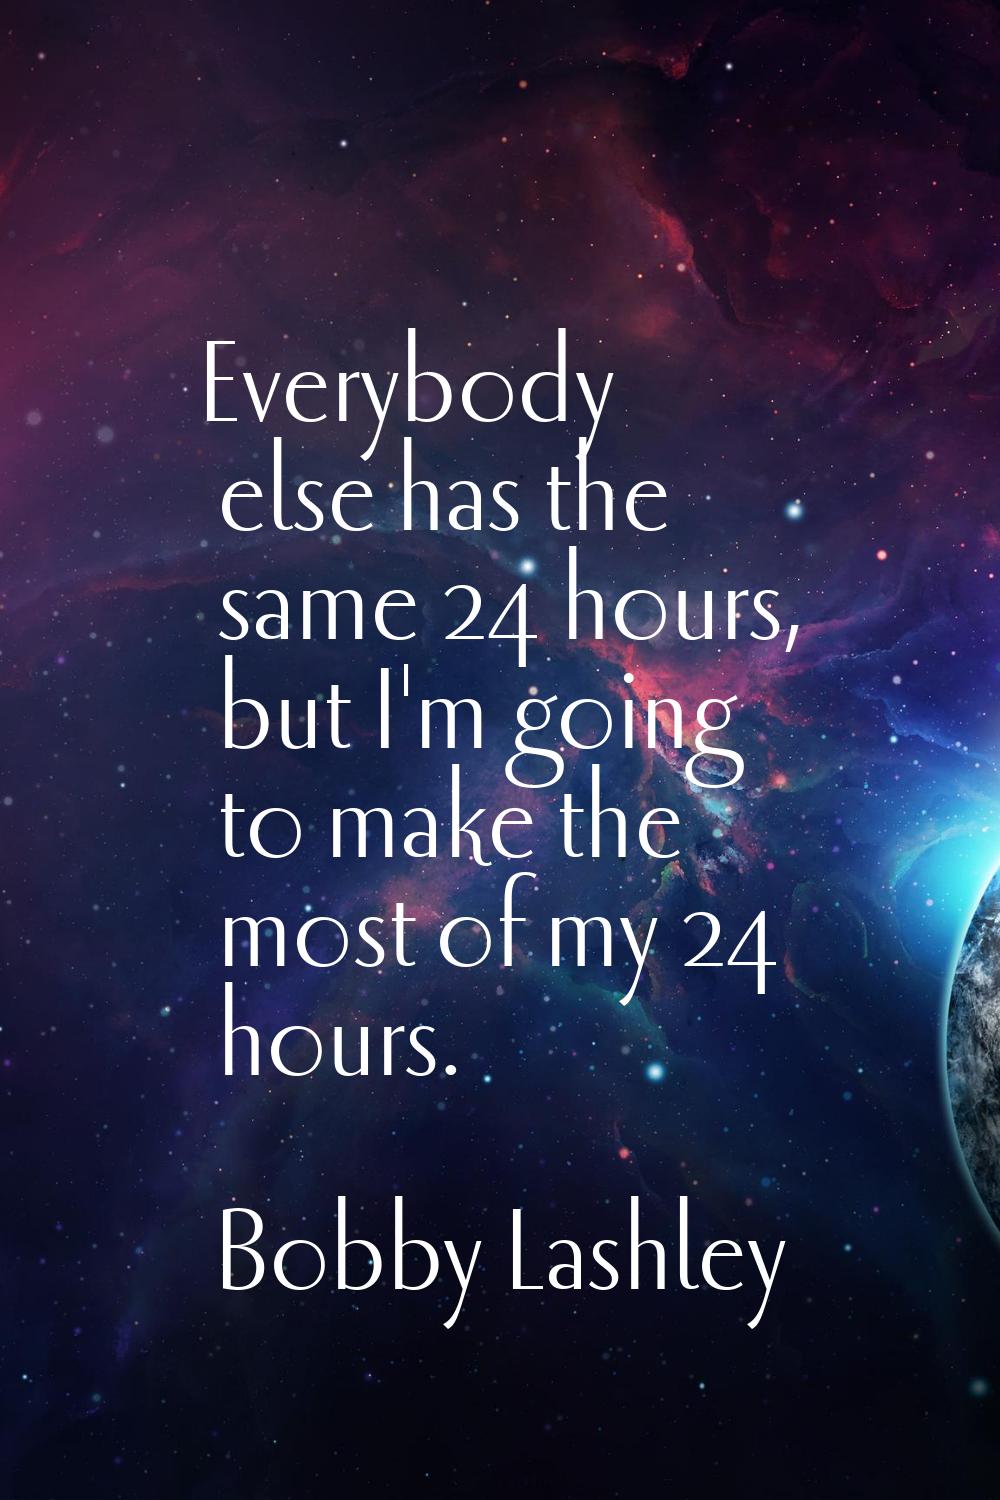 Everybody else has the same 24 hours, but I'm going to make the most of my 24 hours.